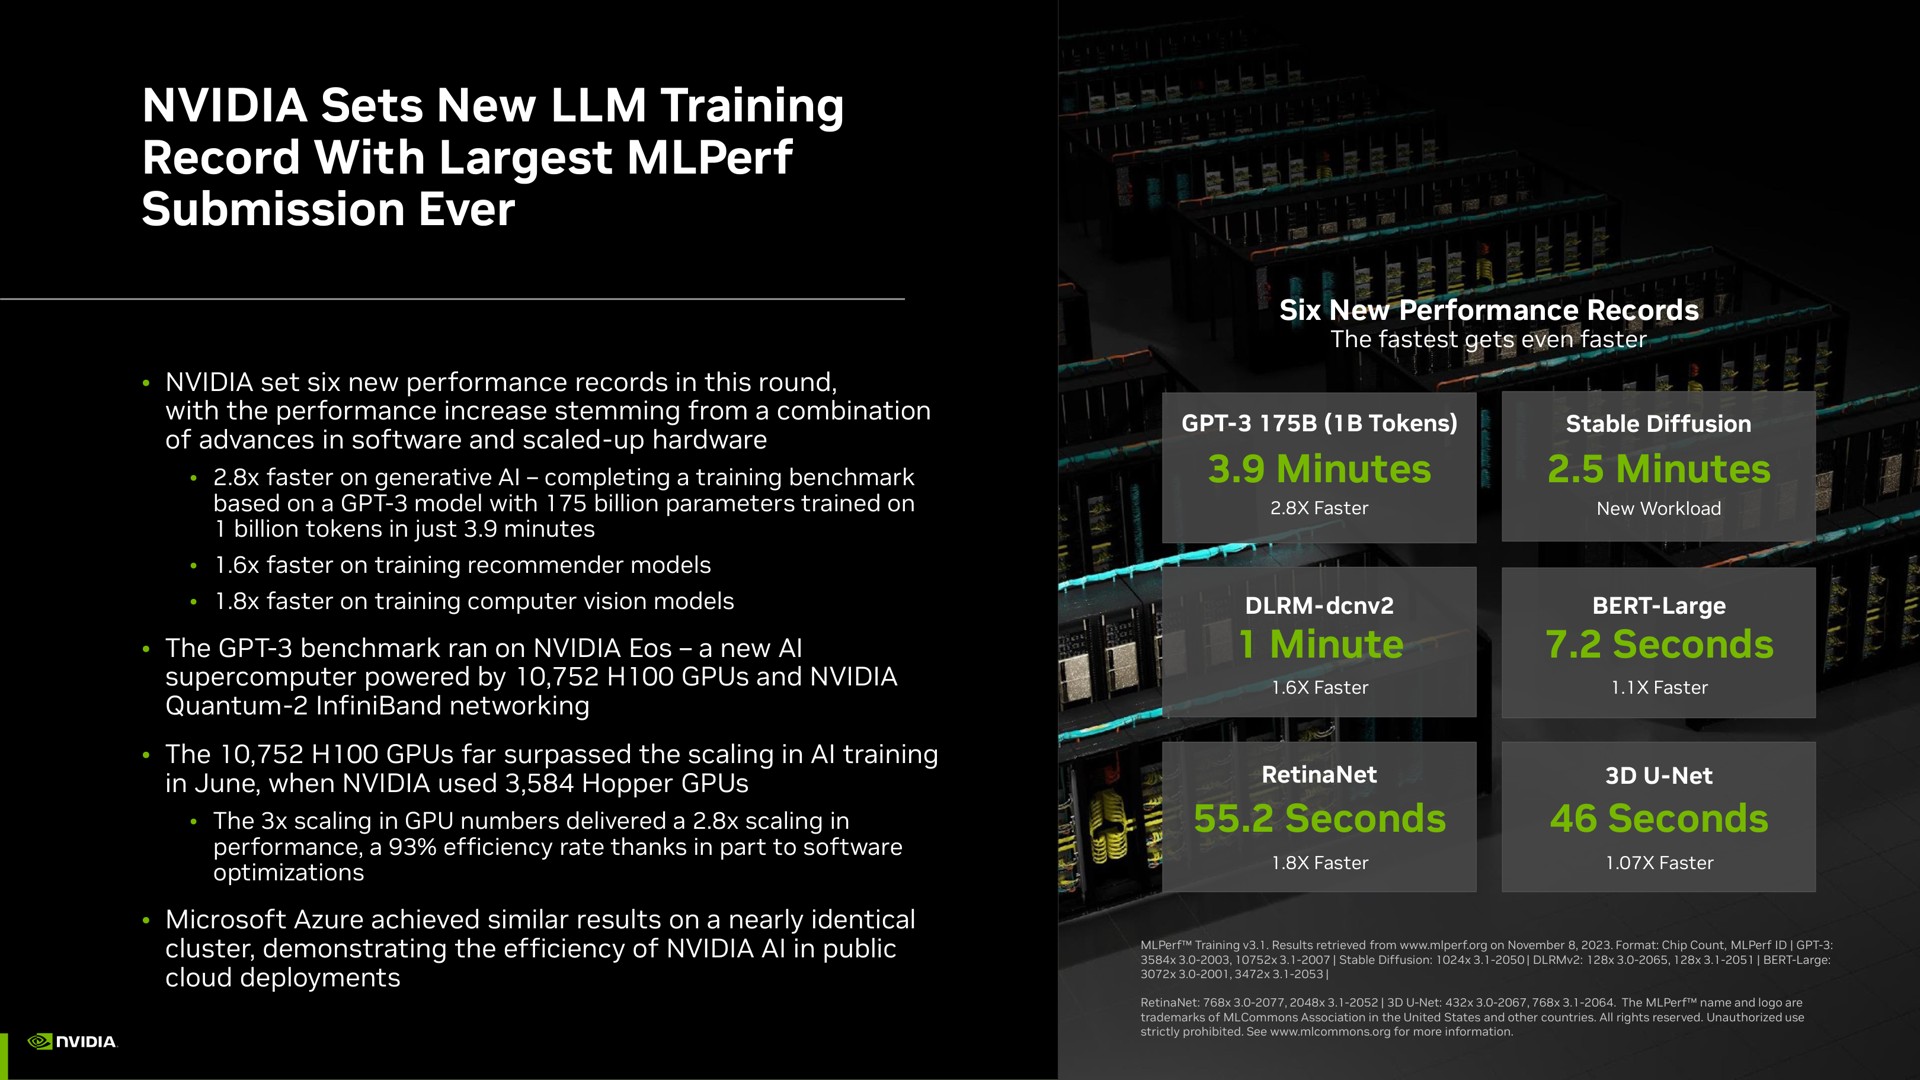 sets new training record with submission ever minutes minutes minute seconds seconds seconds tal | NVIDIA